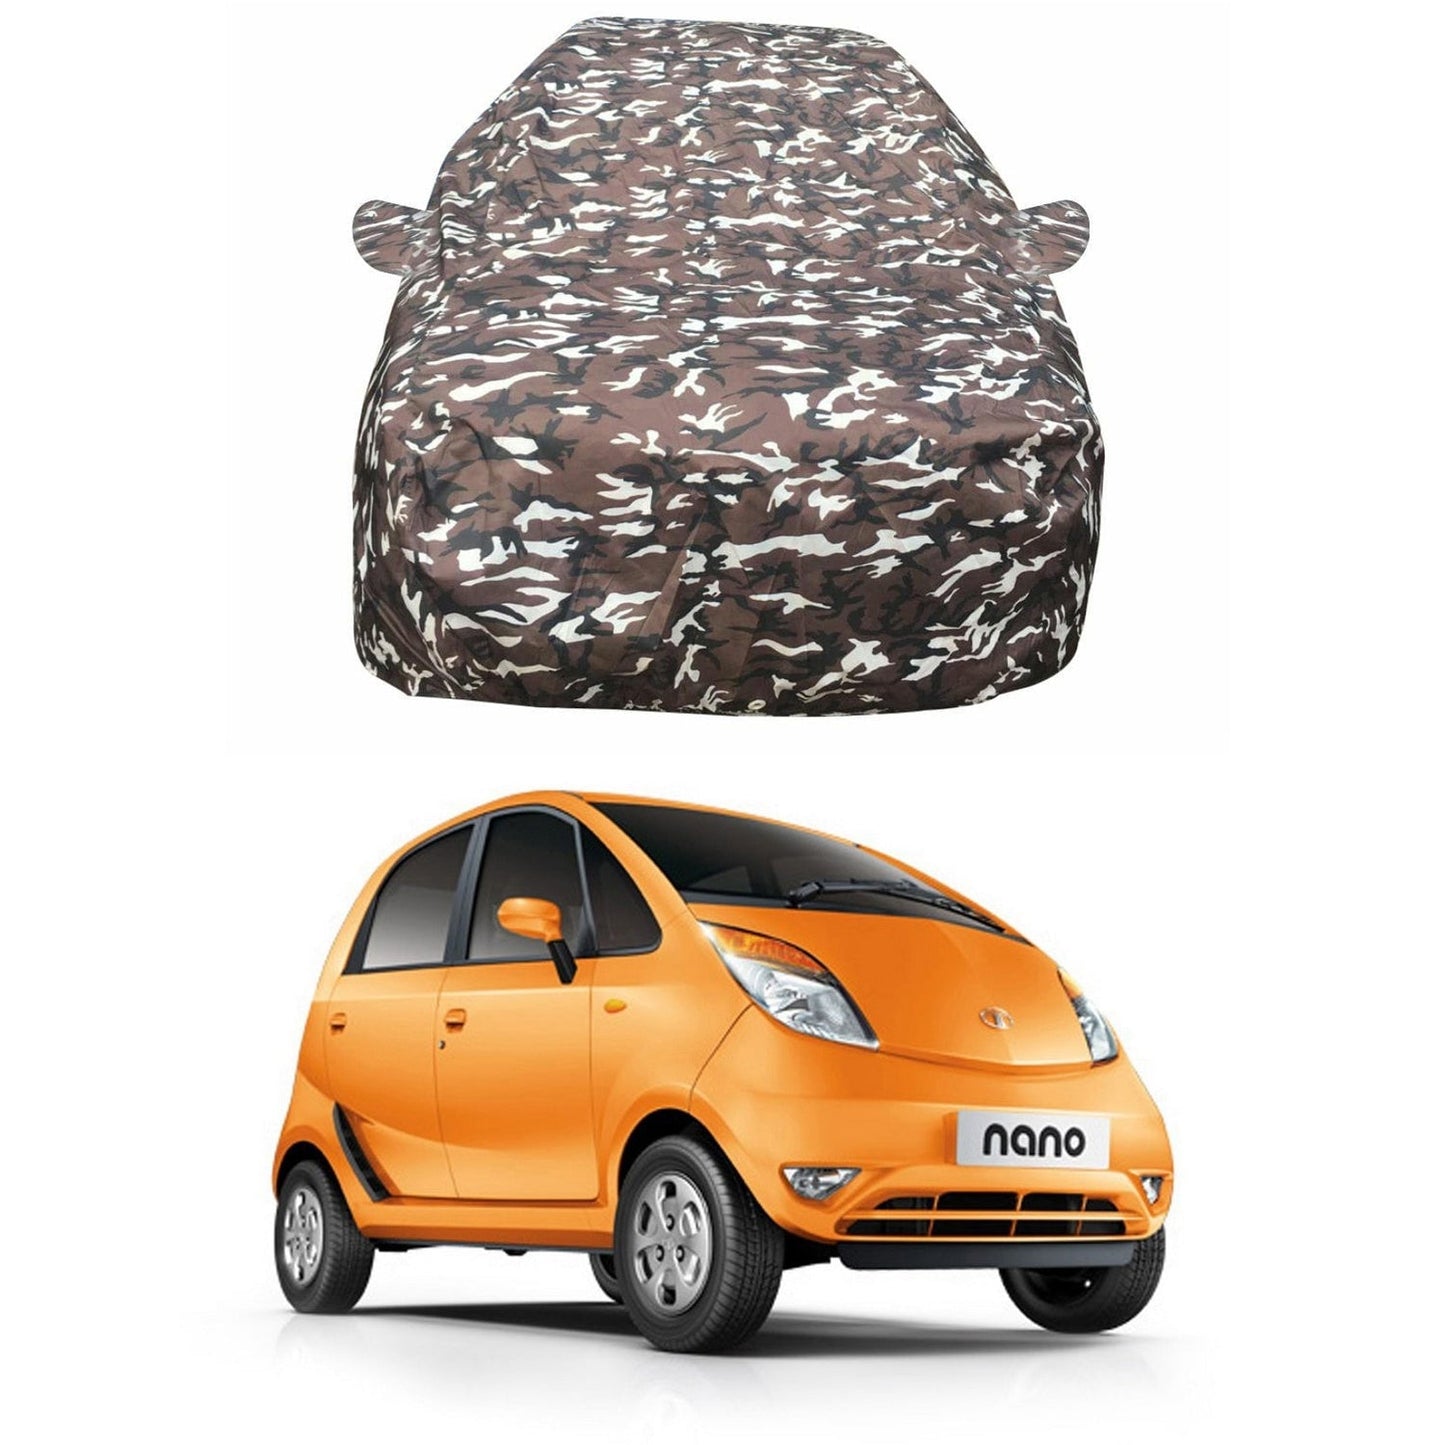 Oshotto Ranger Design Made of 100% Waterproof Fabric Car Body Cover with Mirror Pocket For Tata Nano